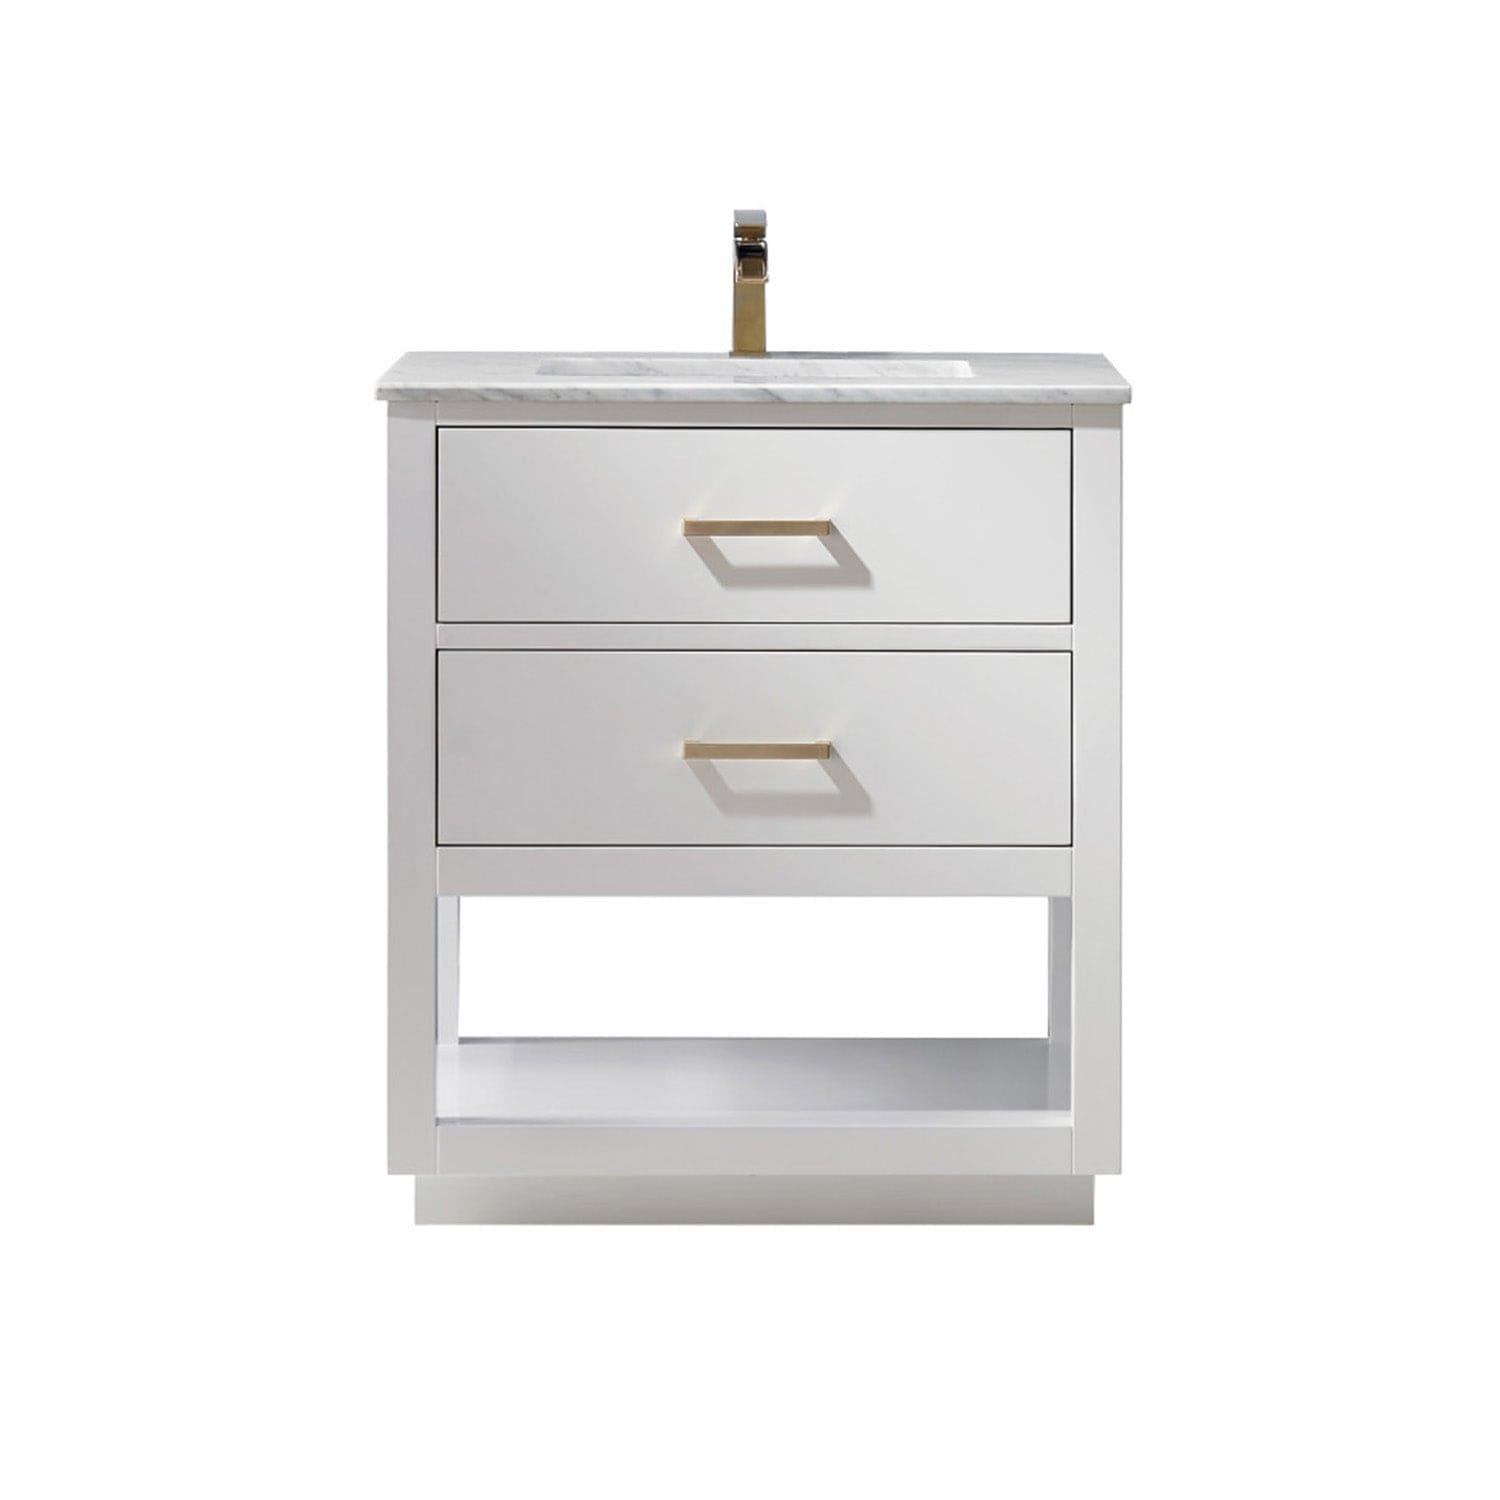 Altair Remi 30" Single Bathroom Vanity Set in White and Carrara White Marble Countertop without Mirror 532030-WH-CA-NM - Molaix631112971386Vanity532030-WH-CA-NM